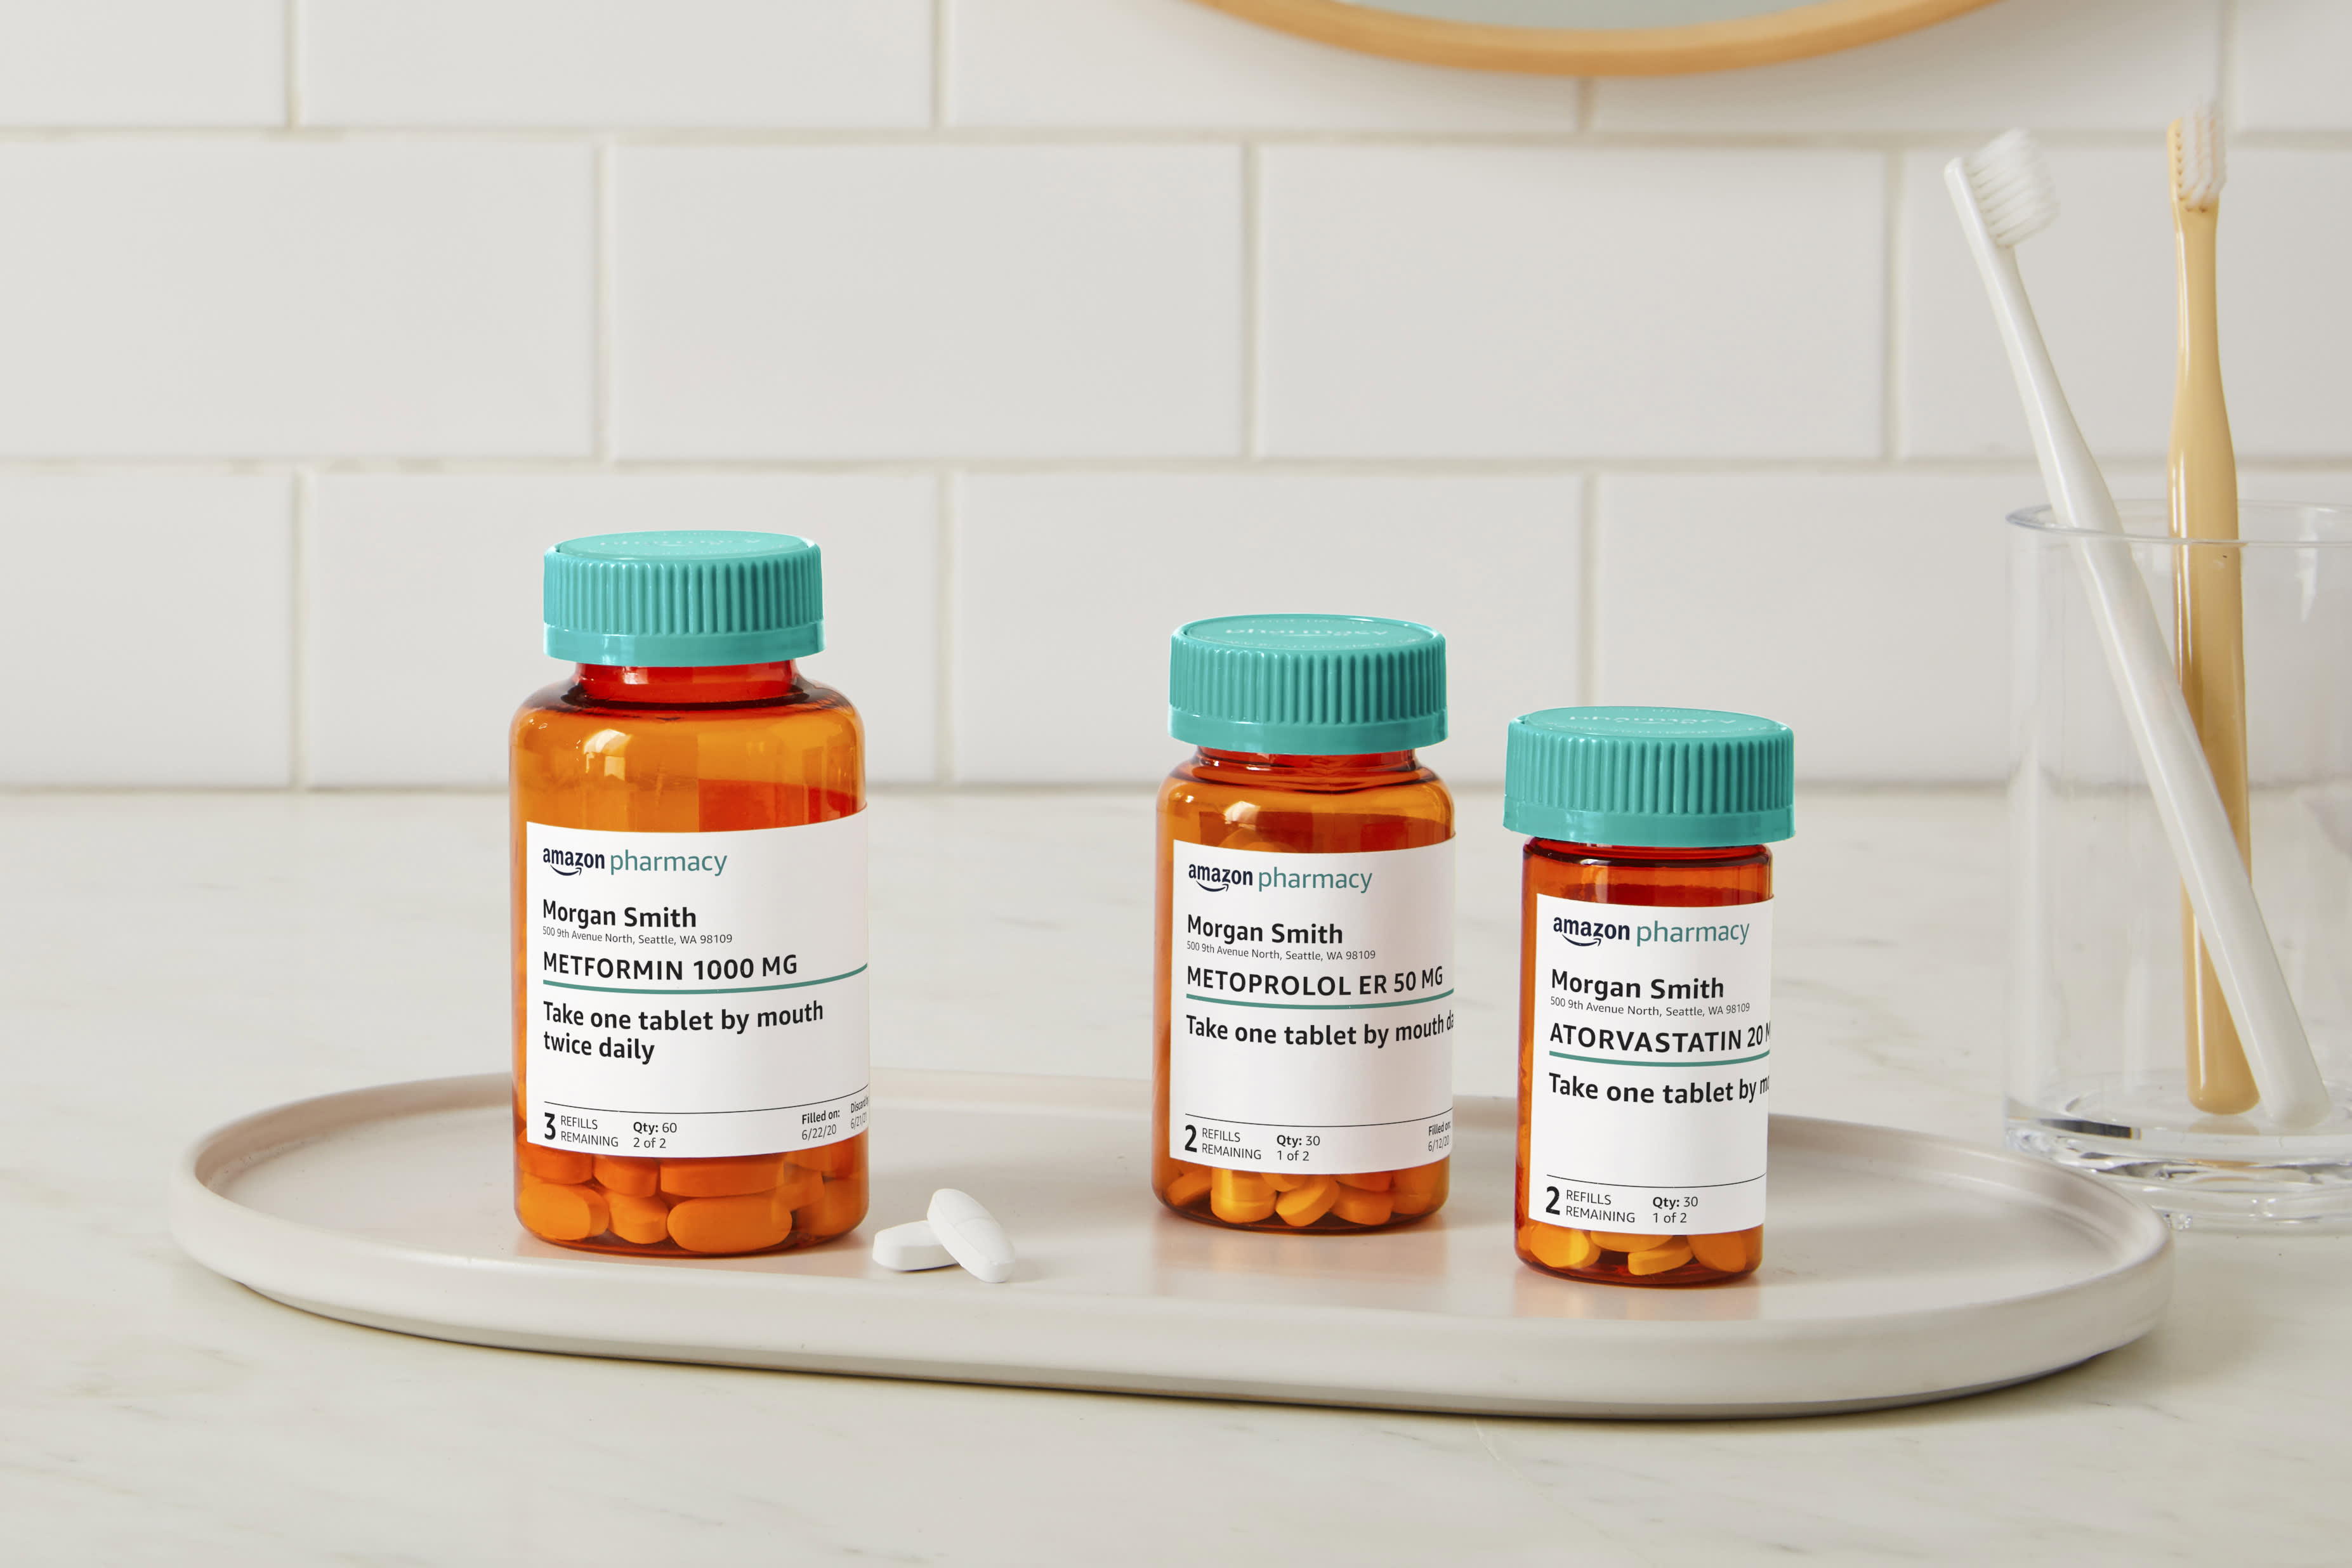 Amazon launches online pharmacy in the United States